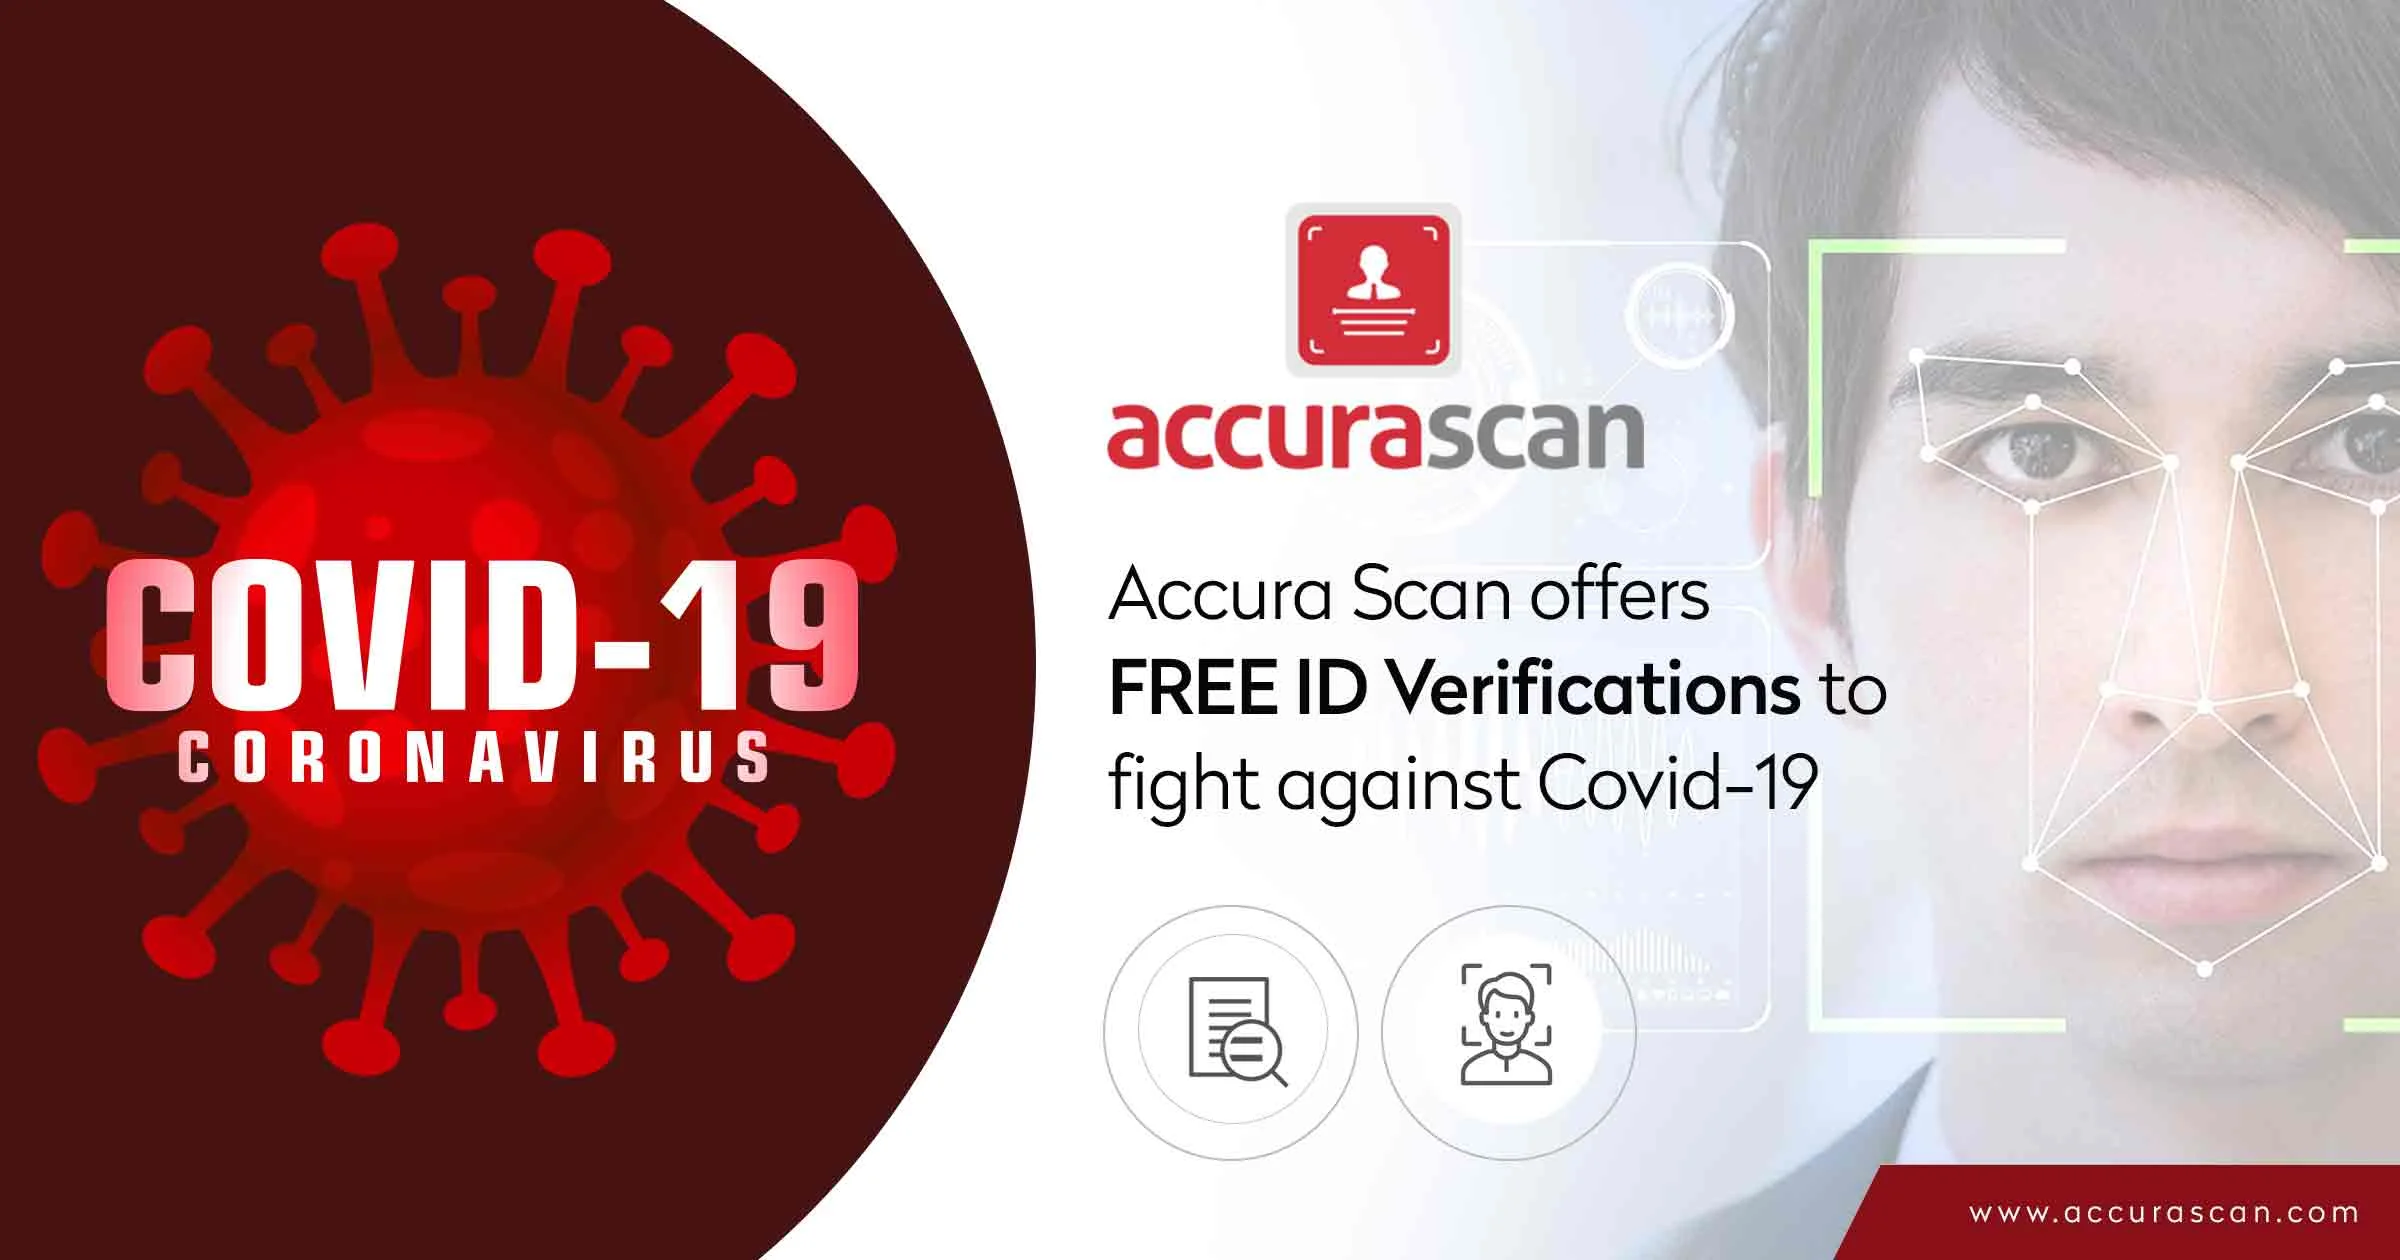 Accura Scan issues free ID Verifications for Health Care to fight against Covid-19